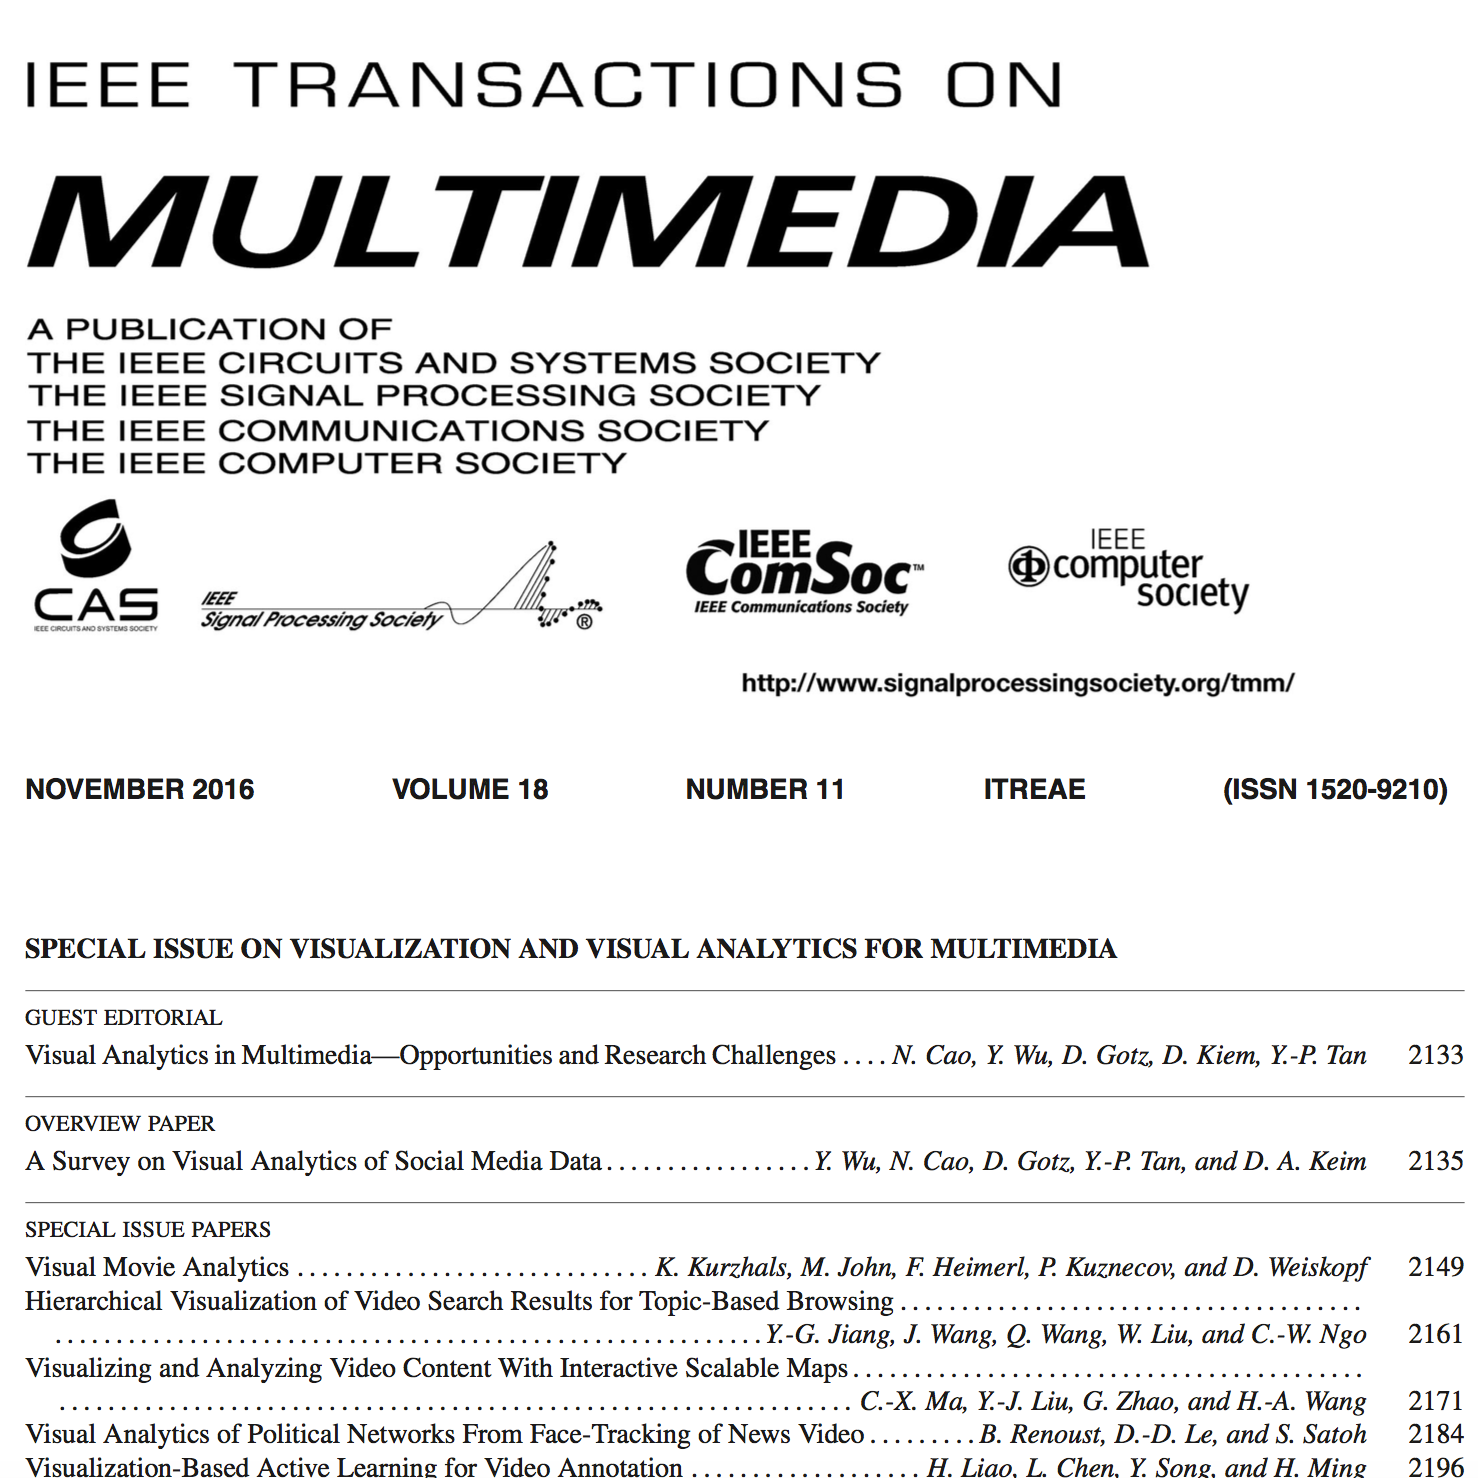 Two New Articles in IEEE Transactions on Multimedia Special Issue